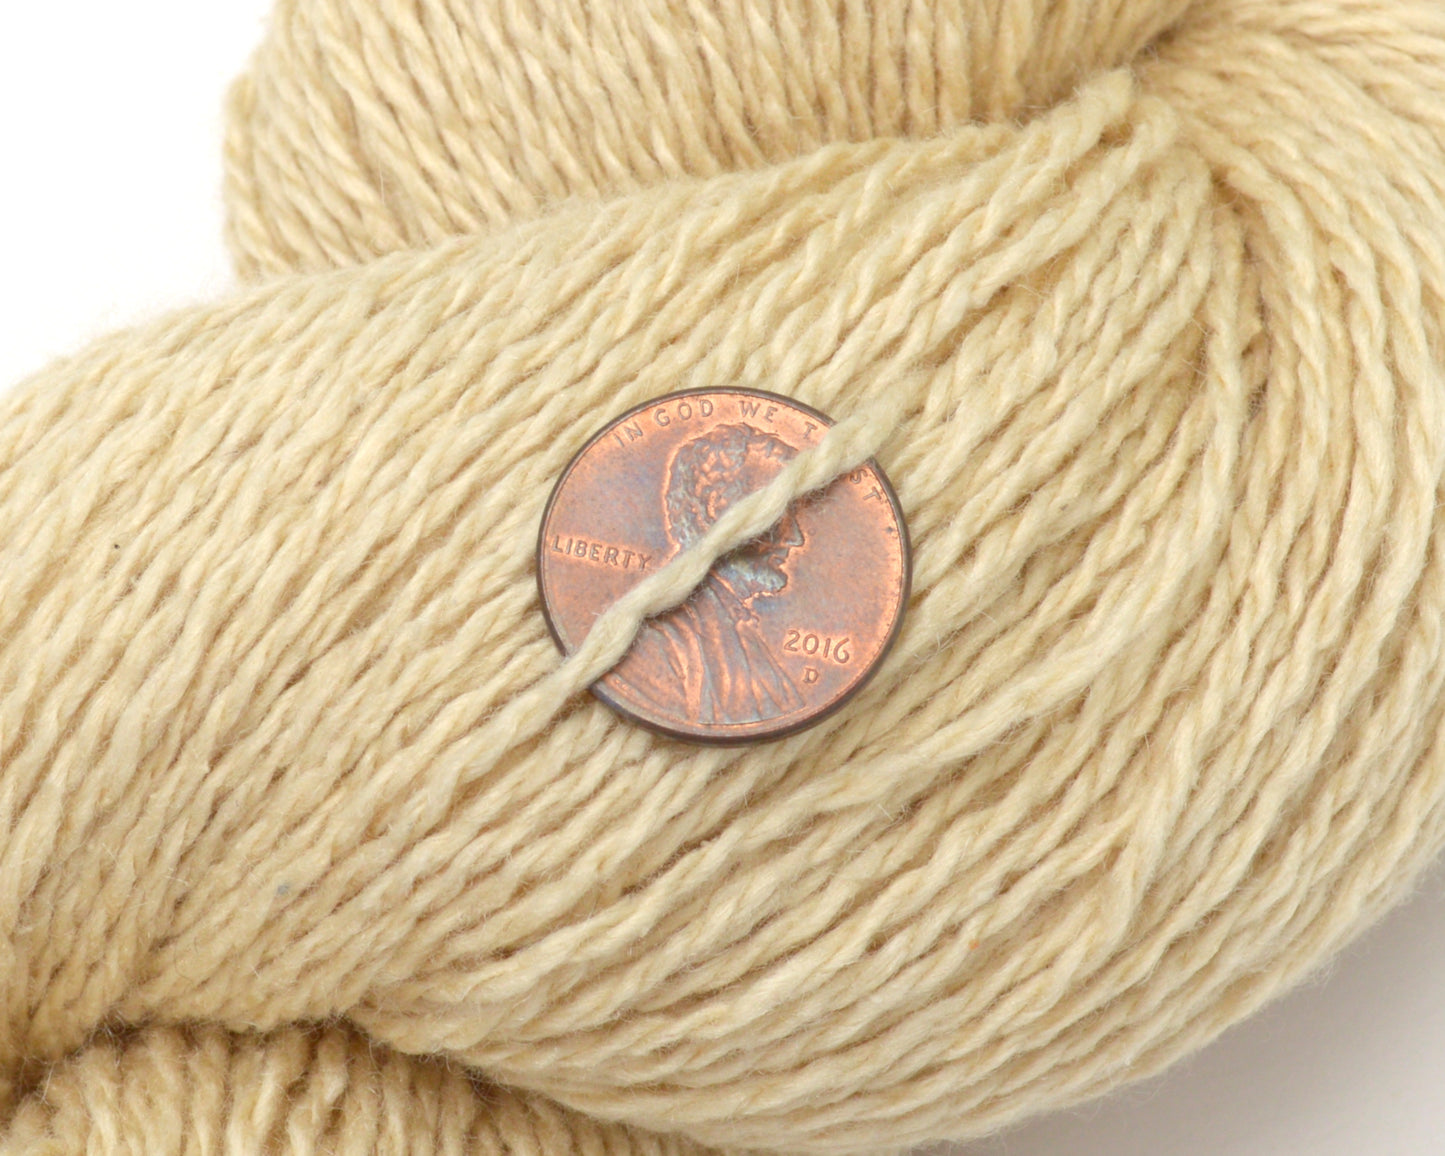 Fingering Weight Silk Cashmere Recycled Yarn in Champagne